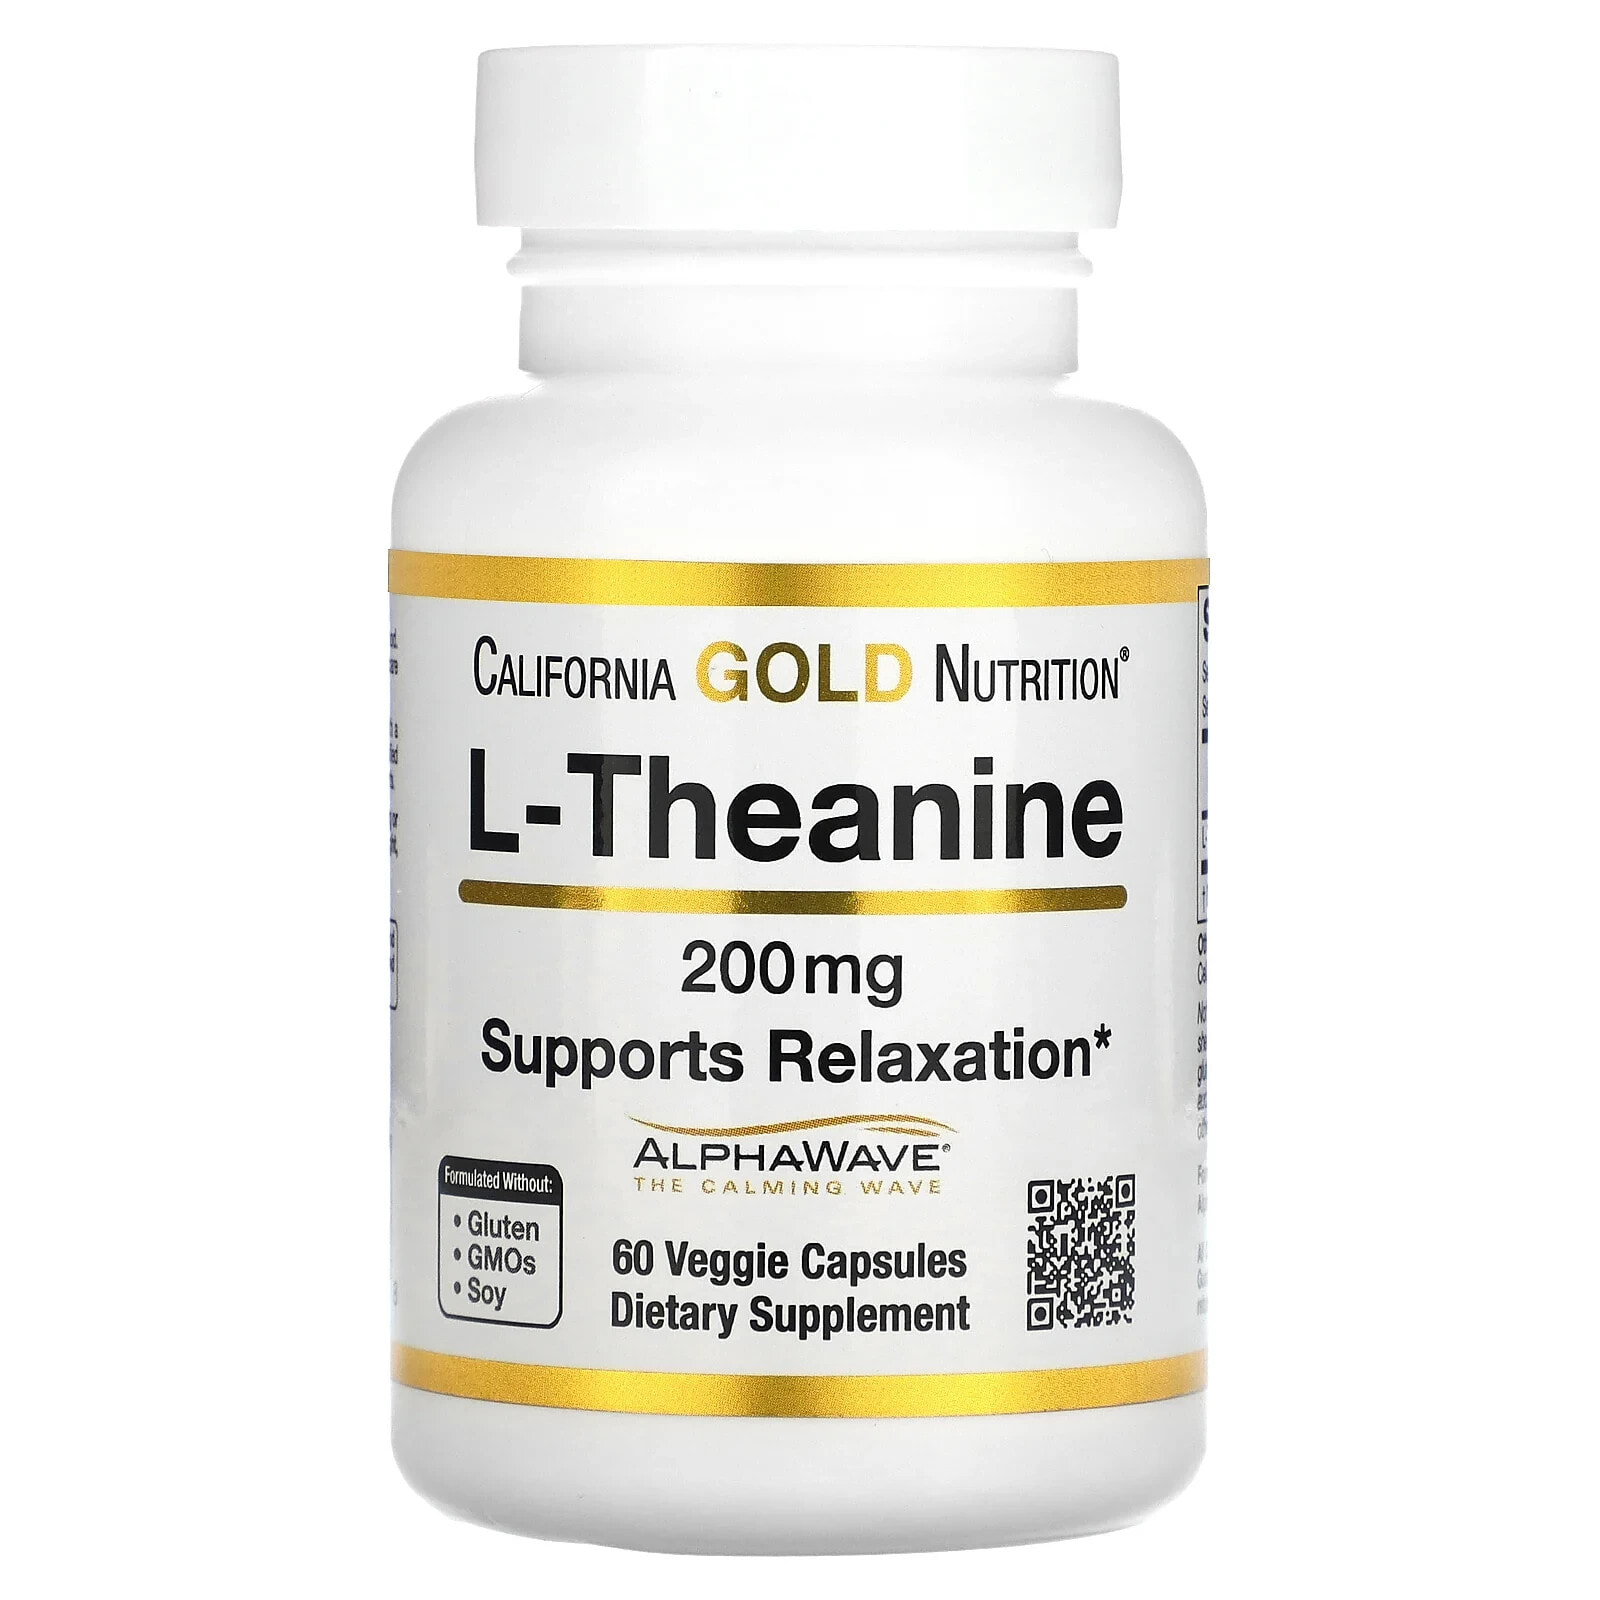 L-Theanine, Featuring AlphaWave, 100 mg, 30 Veggie Capsules